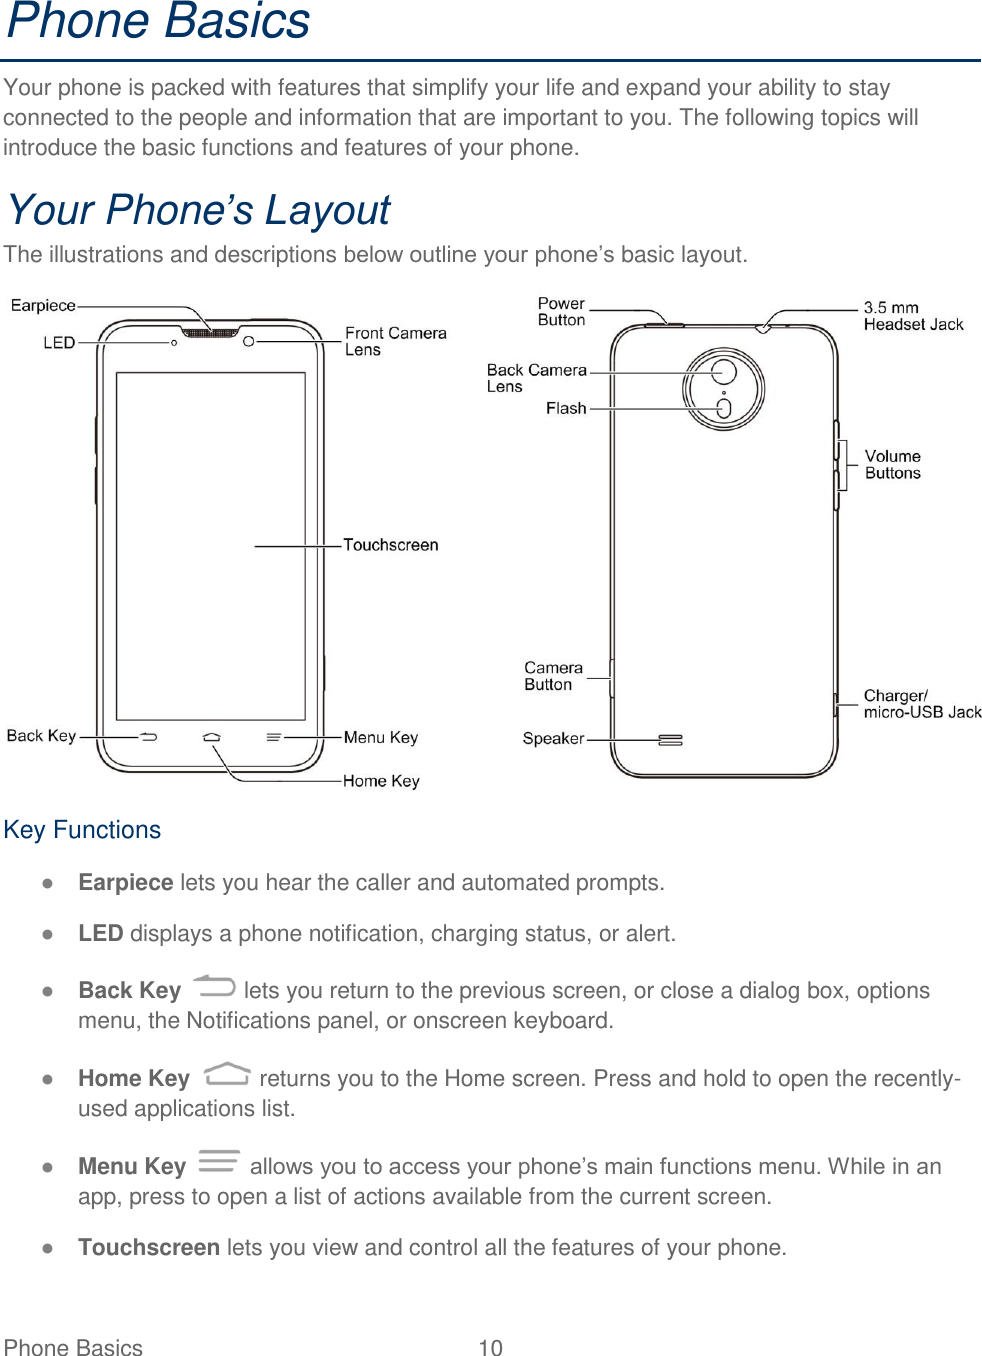 Phone Basics  10   Phone Basics Your phone is packed with features that simplify your life and expand your ability to stay connected to the people and information that are important to you. The following topics will introduce the basic functions and features of your phone. Your Phone’s Layout The illustrations and descriptions below outline your phone‟s basic layout.  Key Functions ● Earpiece lets you hear the caller and automated prompts. ● LED displays a phone notification, charging status, or alert. ● Back Key   lets you return to the previous screen, or close a dialog box, options menu, the Notifications panel, or onscreen keyboard. ● Home Key   returns you to the Home screen. Press and hold to open the recently-used applications list. ● Menu Key   allows you to access your phone‟s main functions menu. While in an app, press to open a list of actions available from the current screen. ● Touchscreen lets you view and control all the features of your phone. 